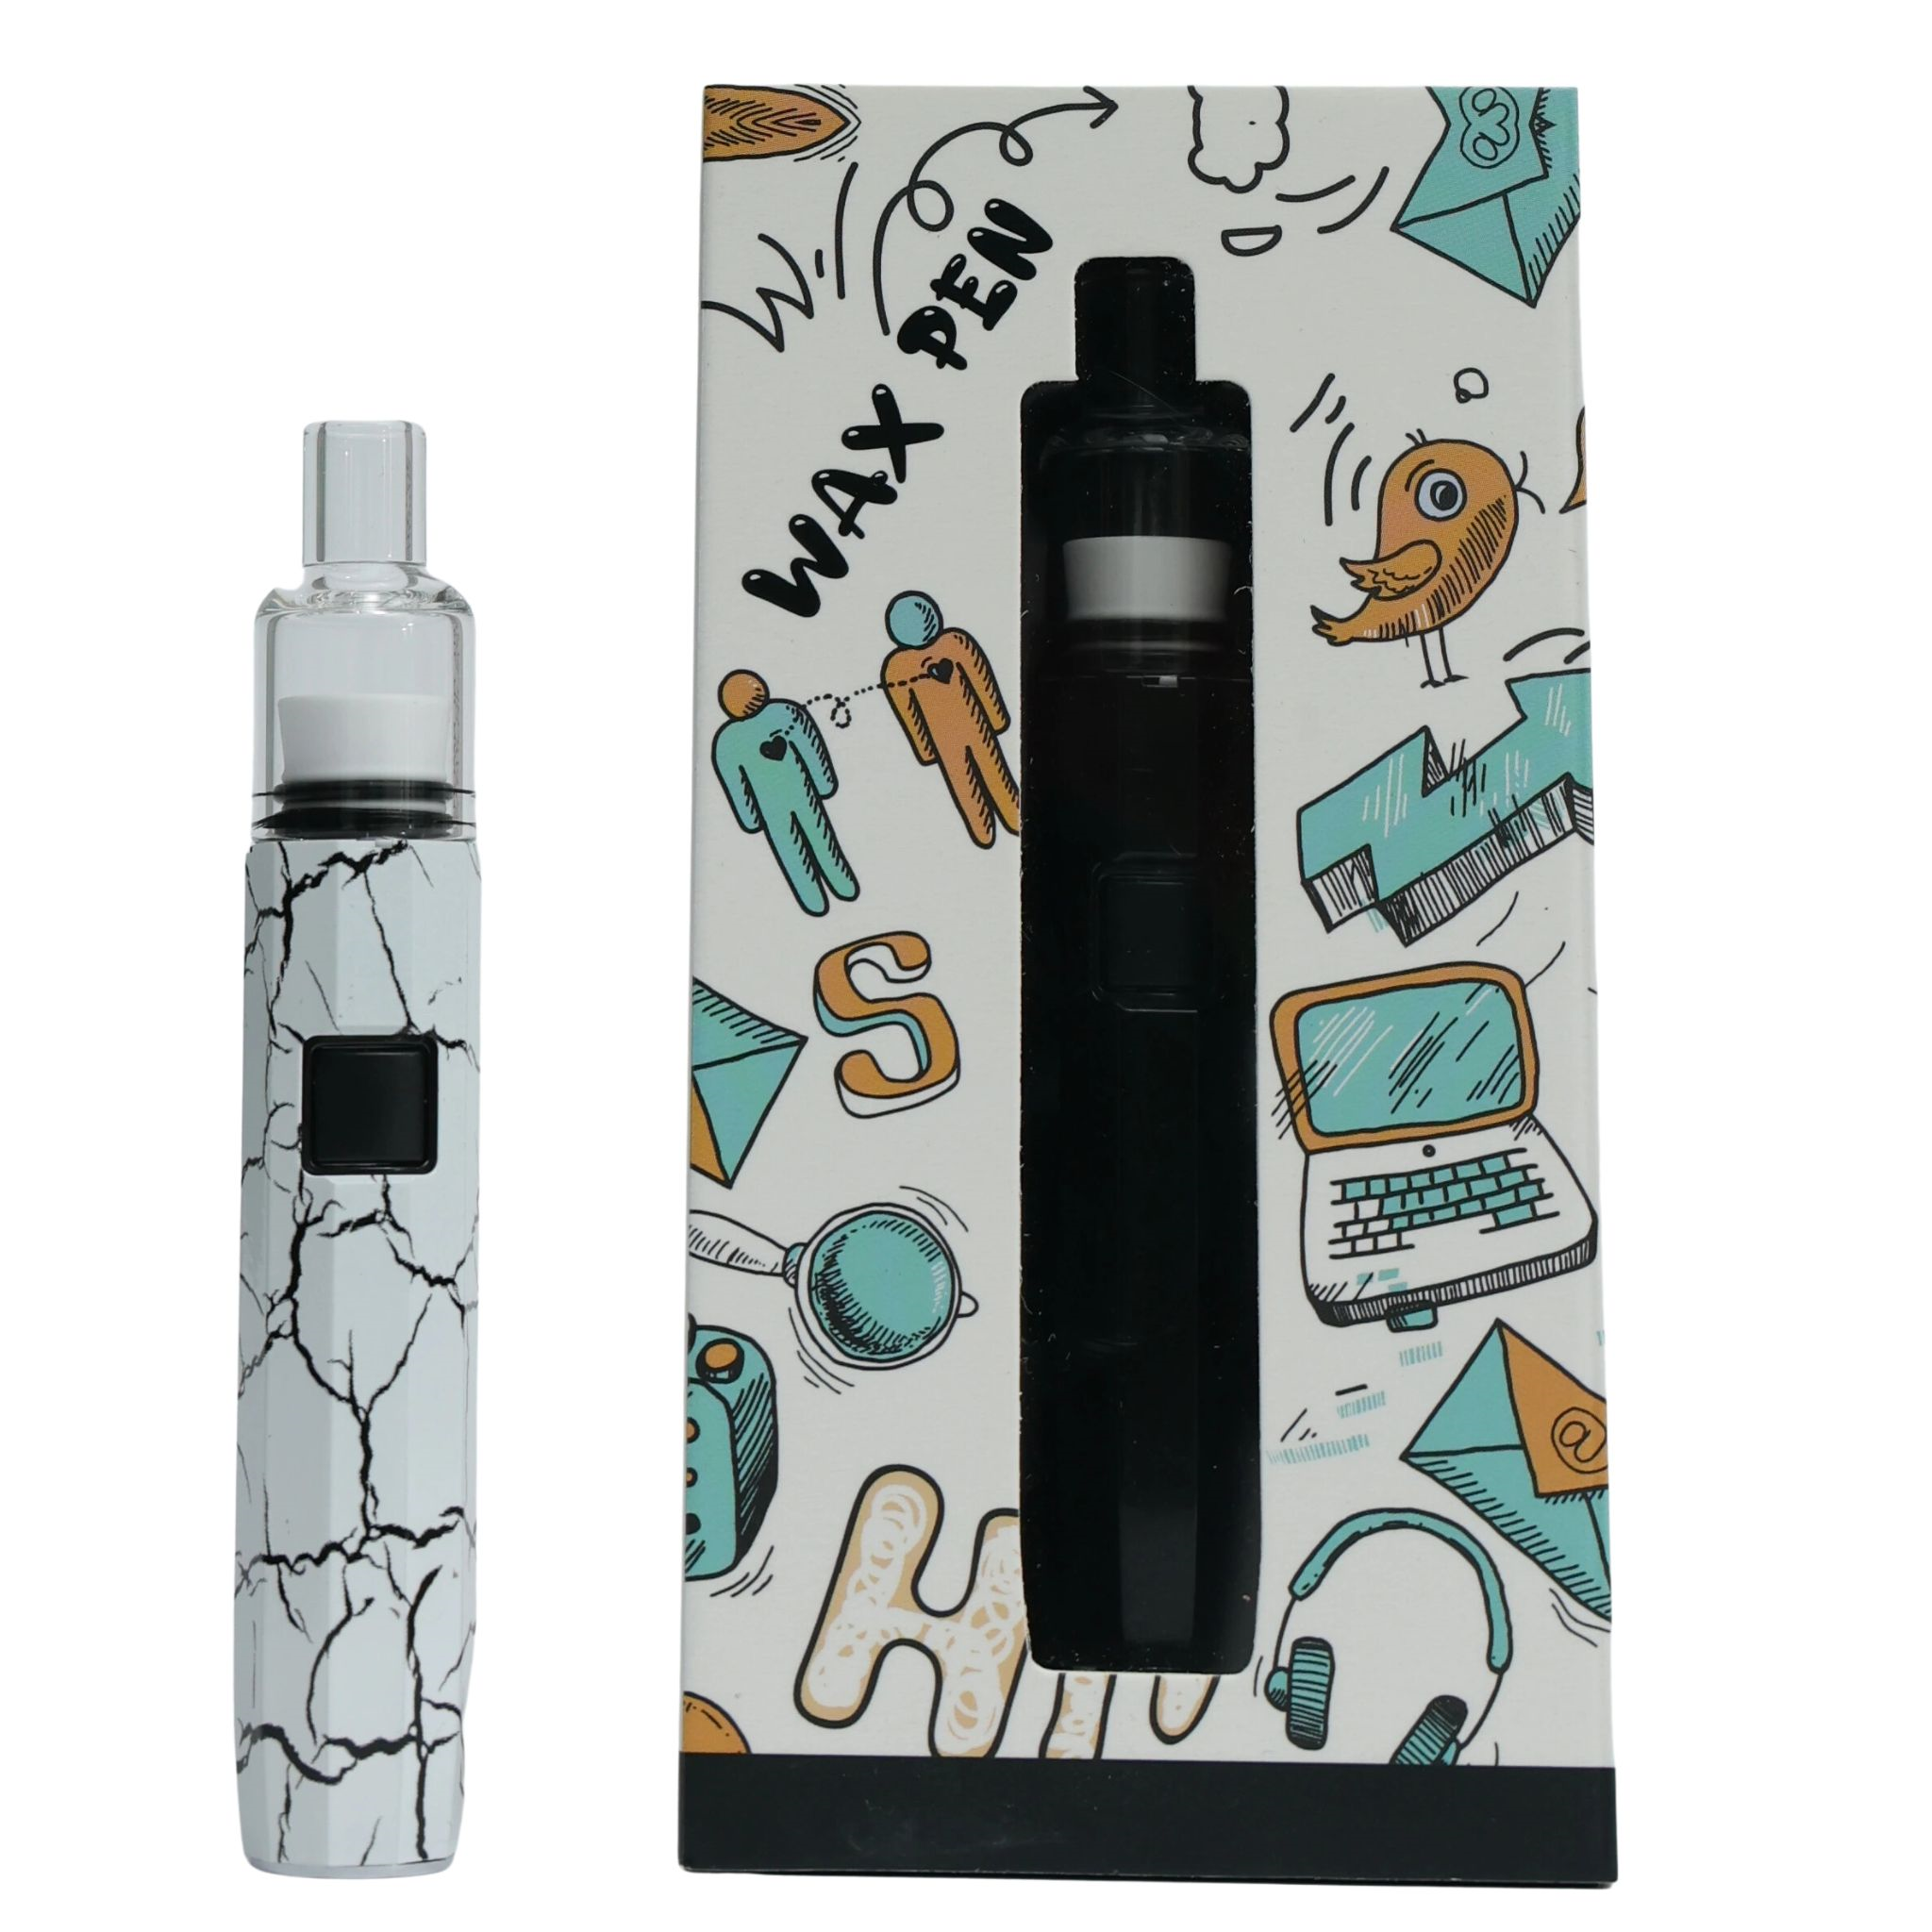 Wax Pen Vaporizer Kit Variable Voltage with 500mAh Battery